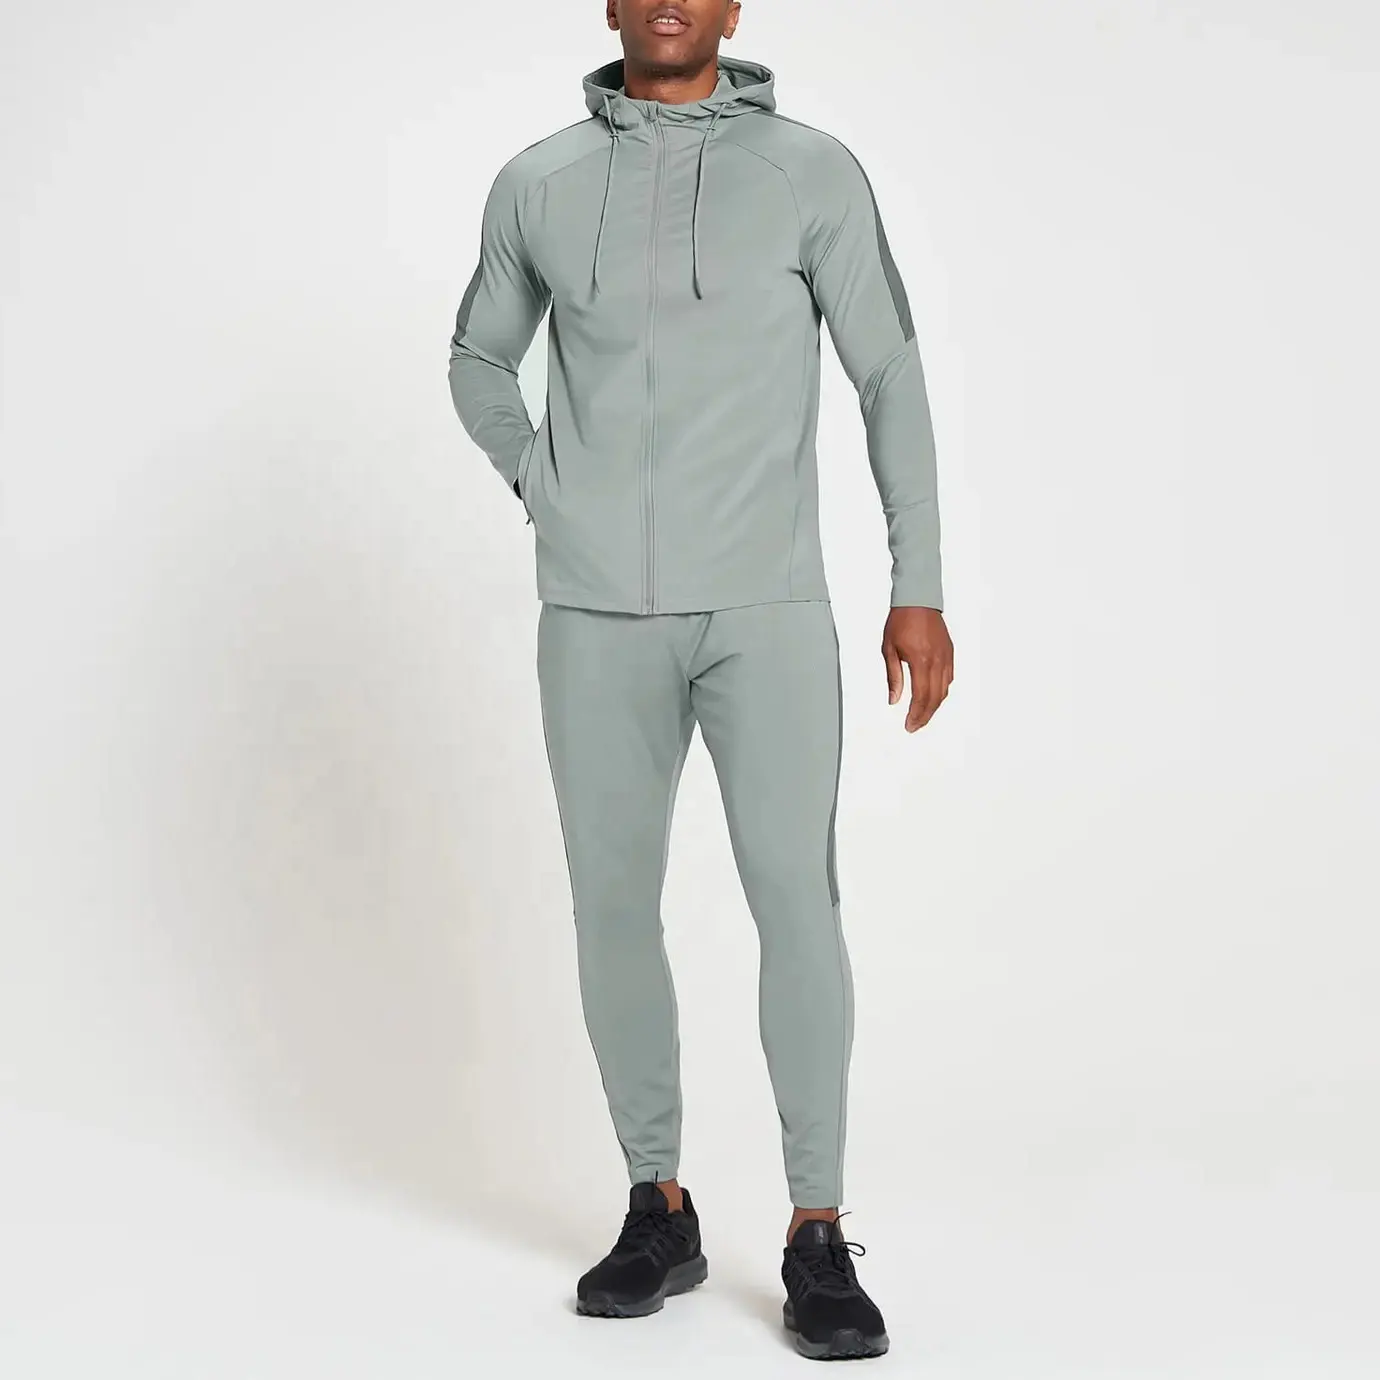 Custom Mens Blank Full Zip Up 4-way Stretch Material Sweatpants and Hoodie Set Tracksuit for Men